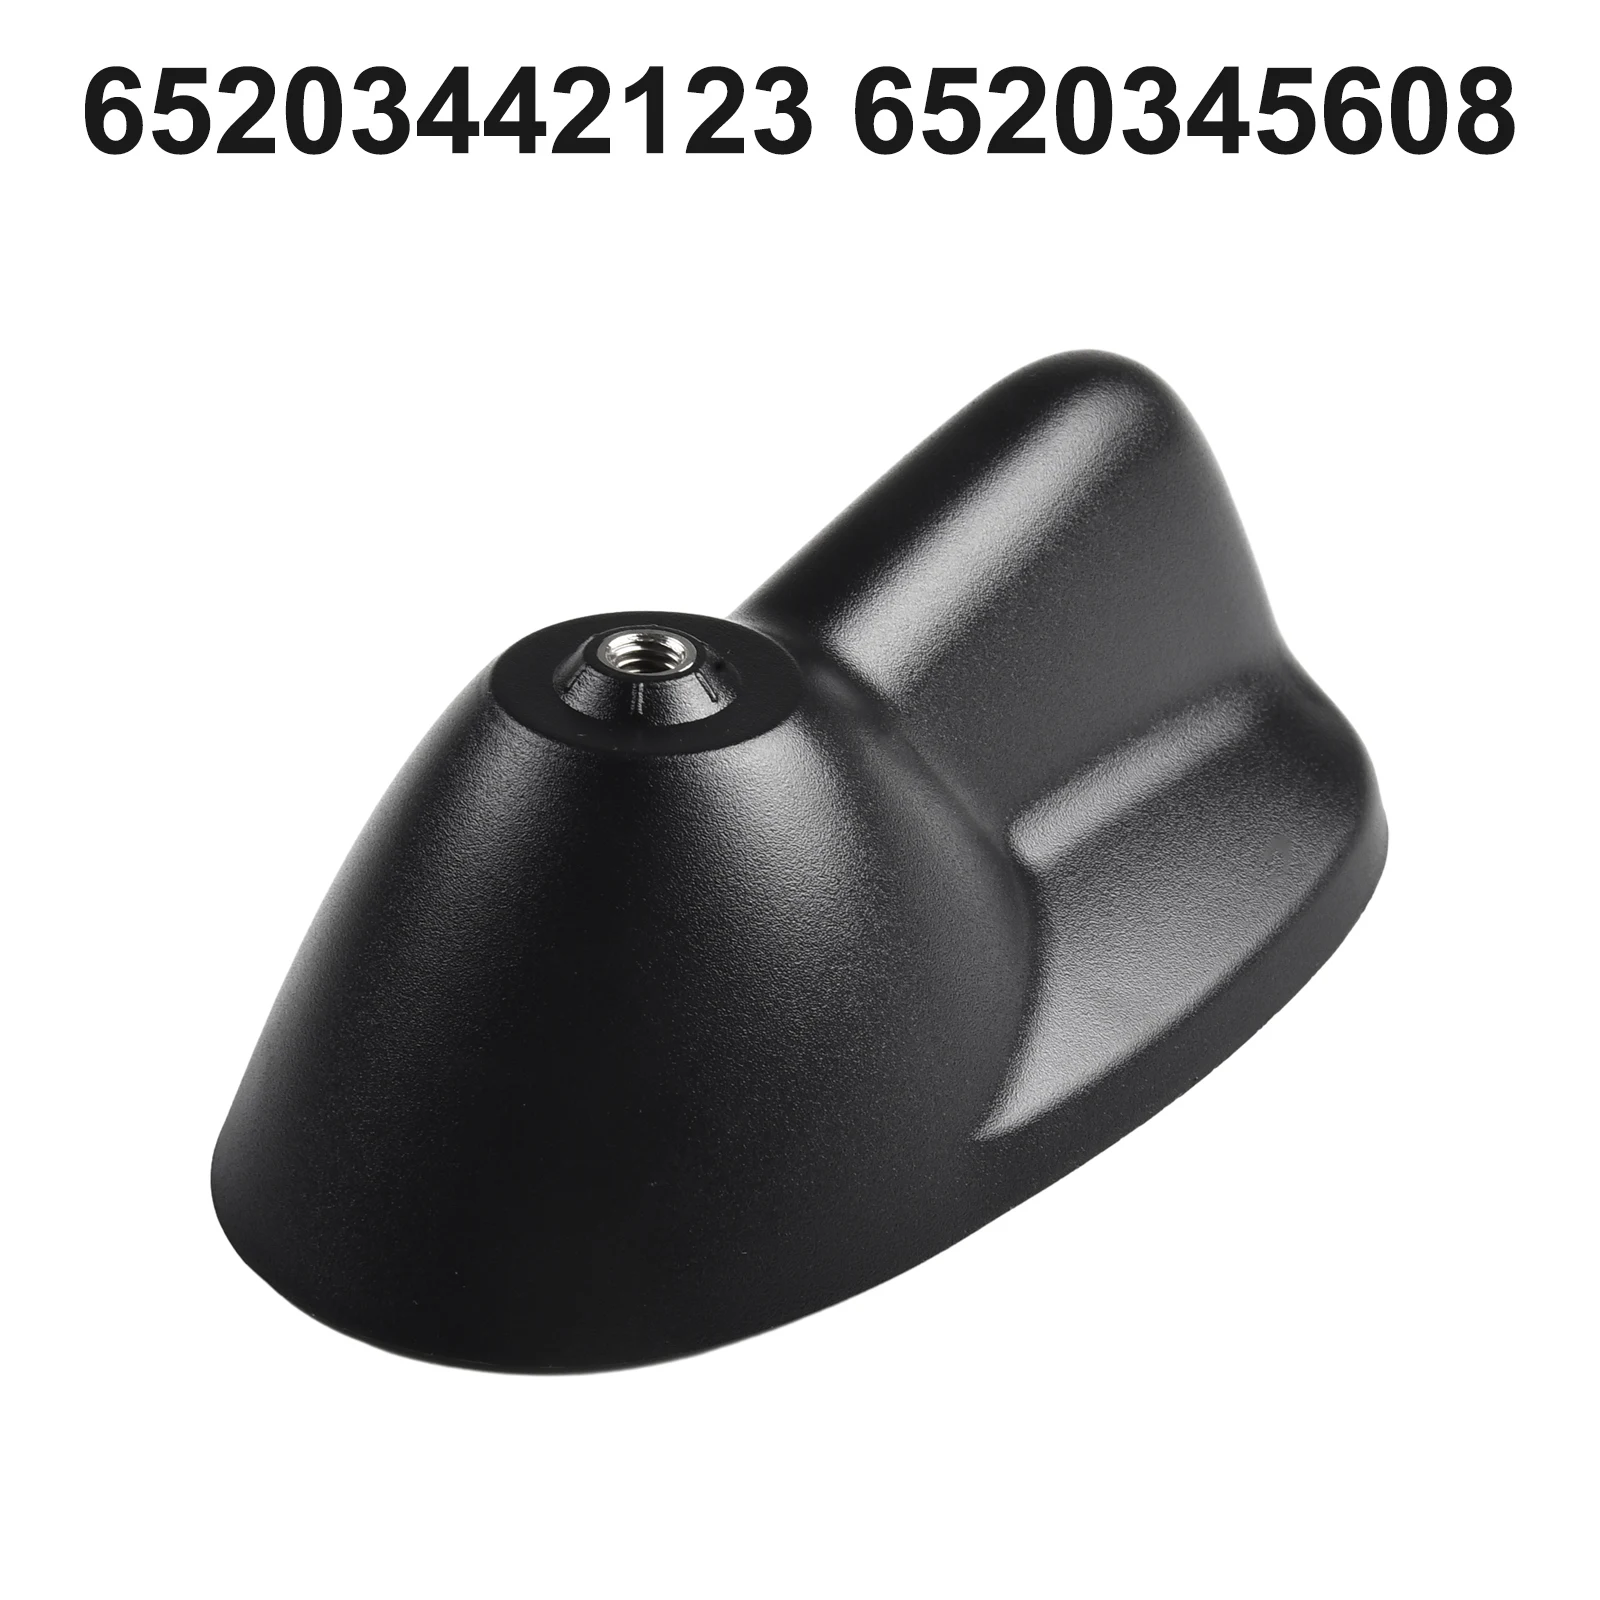 

1PCS For BMW For MINI For Clubman R55 R56 Antenna Base Cover 65203442123 65203456089 Black Automotive Exterior Accessories